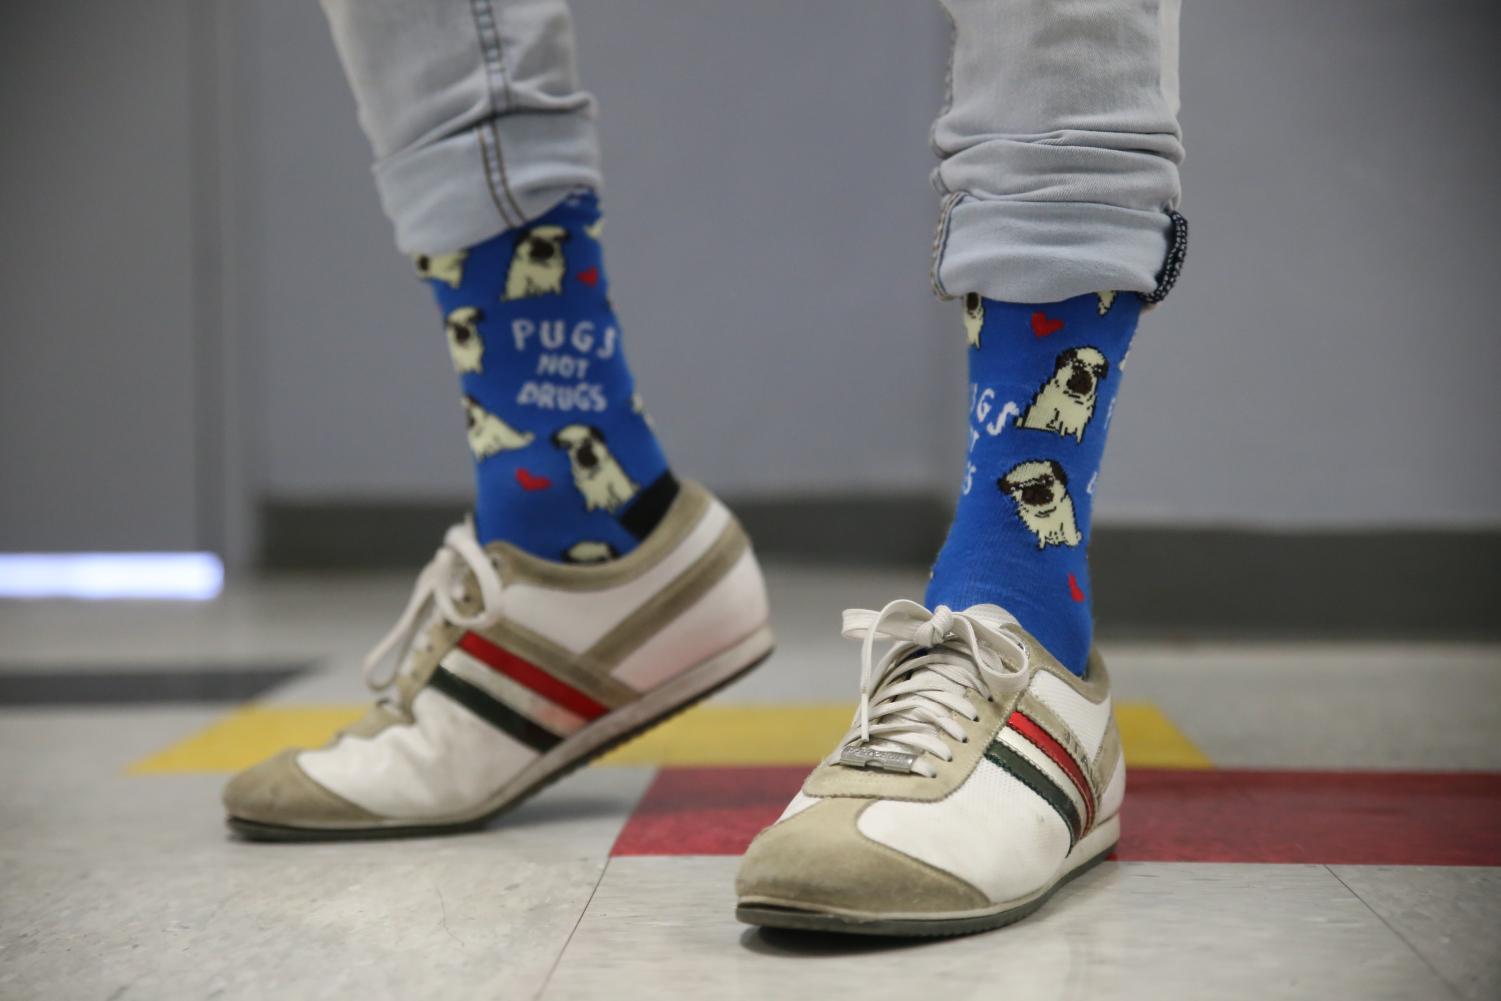 Fantastic+Socks+and+Where+To+Find+Them